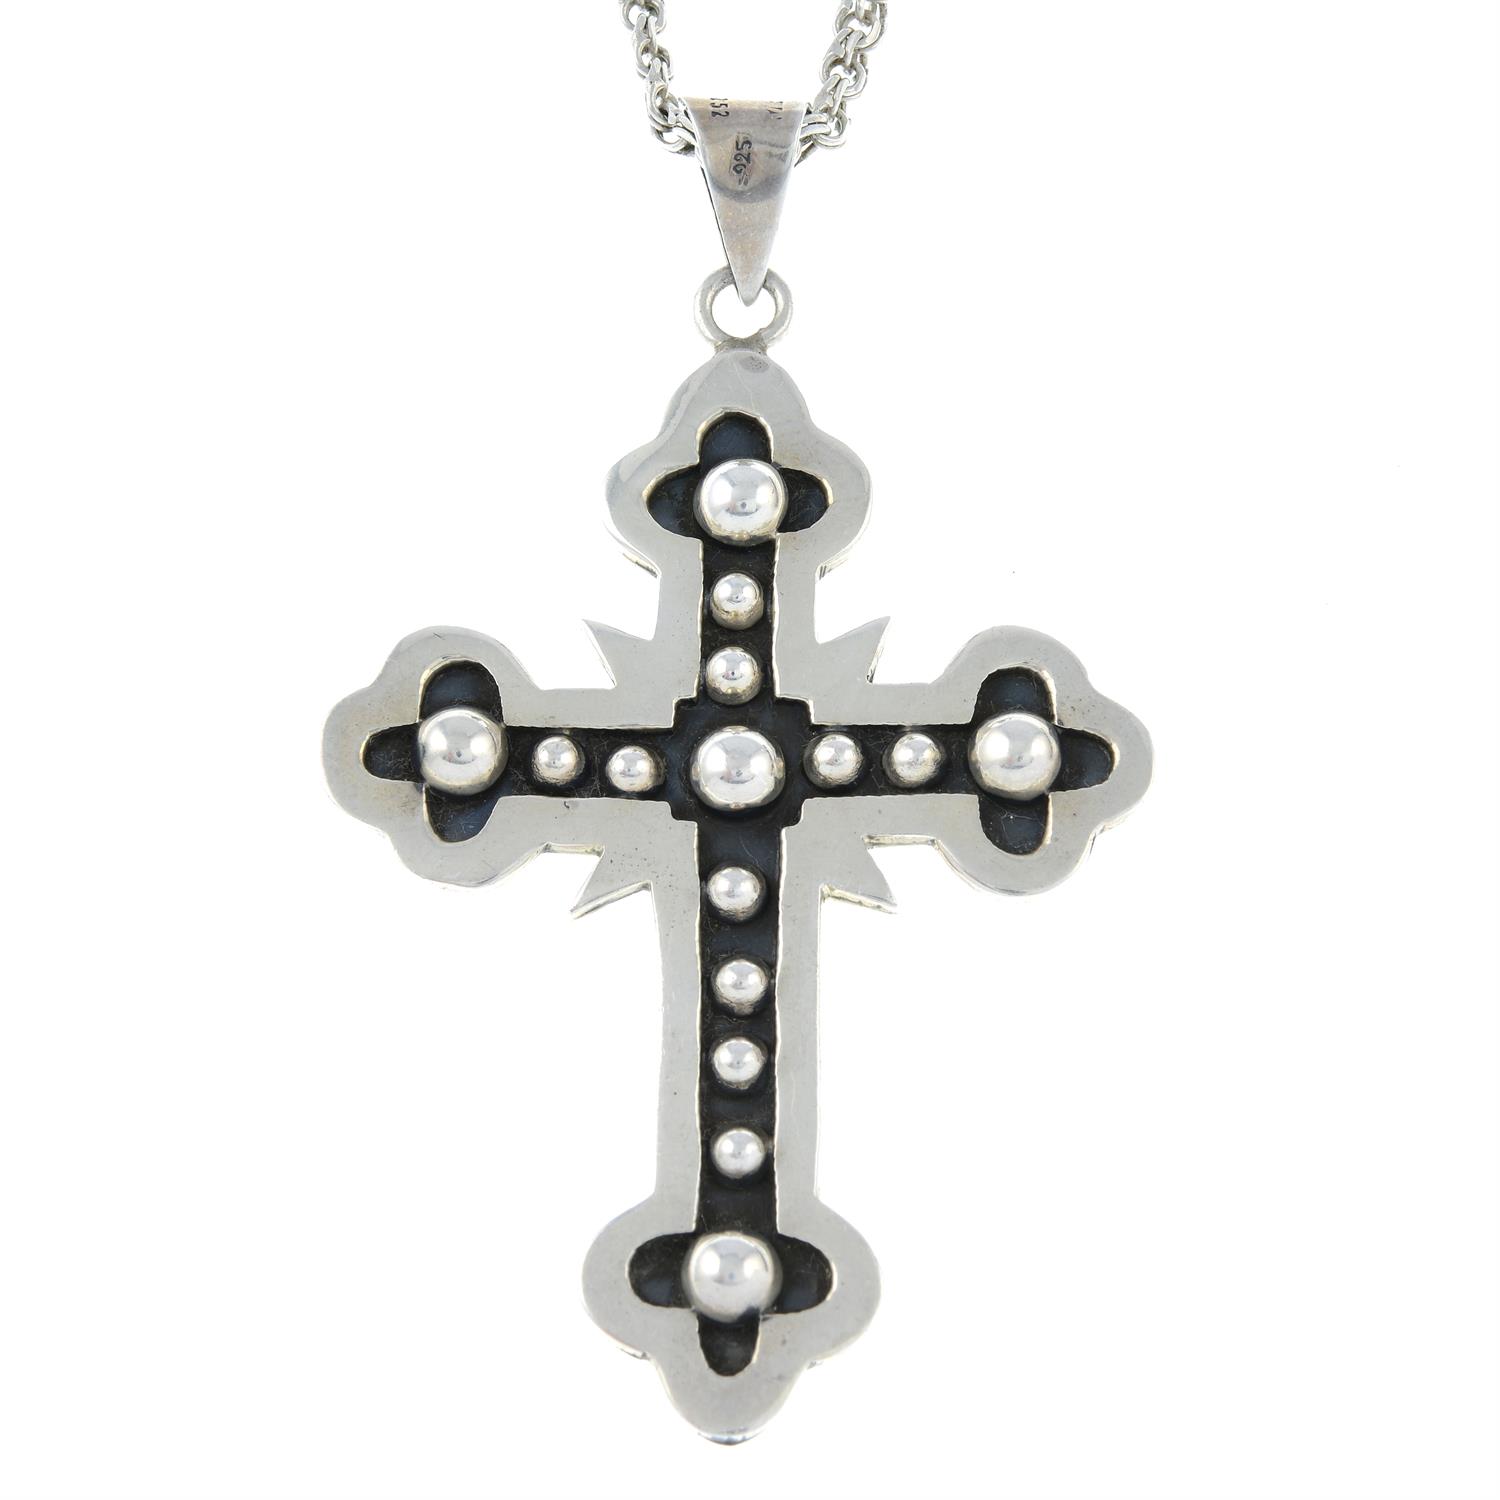 A cross pendant with chain.